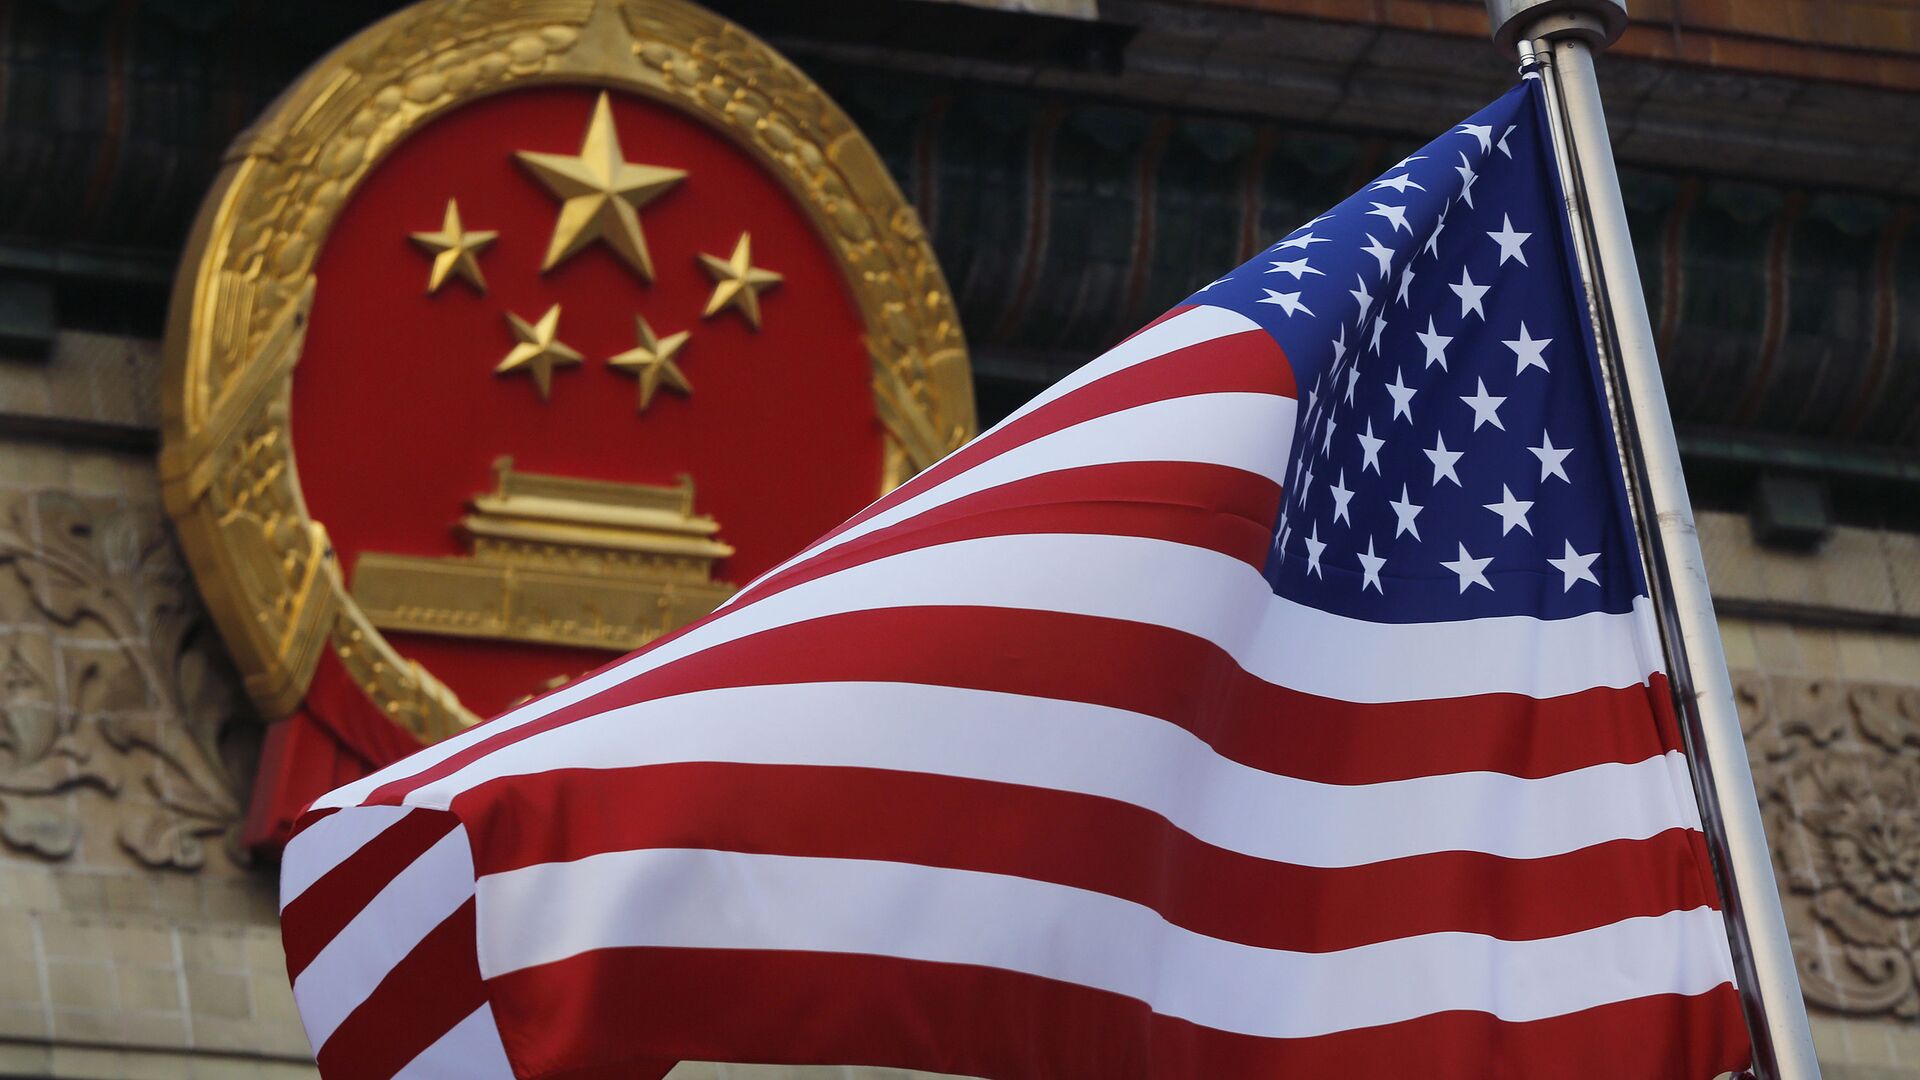 In this Nov. 9, 2017, file photo, an American flag is flown next to the Chinese national emblem during a welcome ceremony for visiting U.S. President Donald Trump outside the Great Hall of the People in Beijing.  - Sputnik International, 1920, 13.09.2021